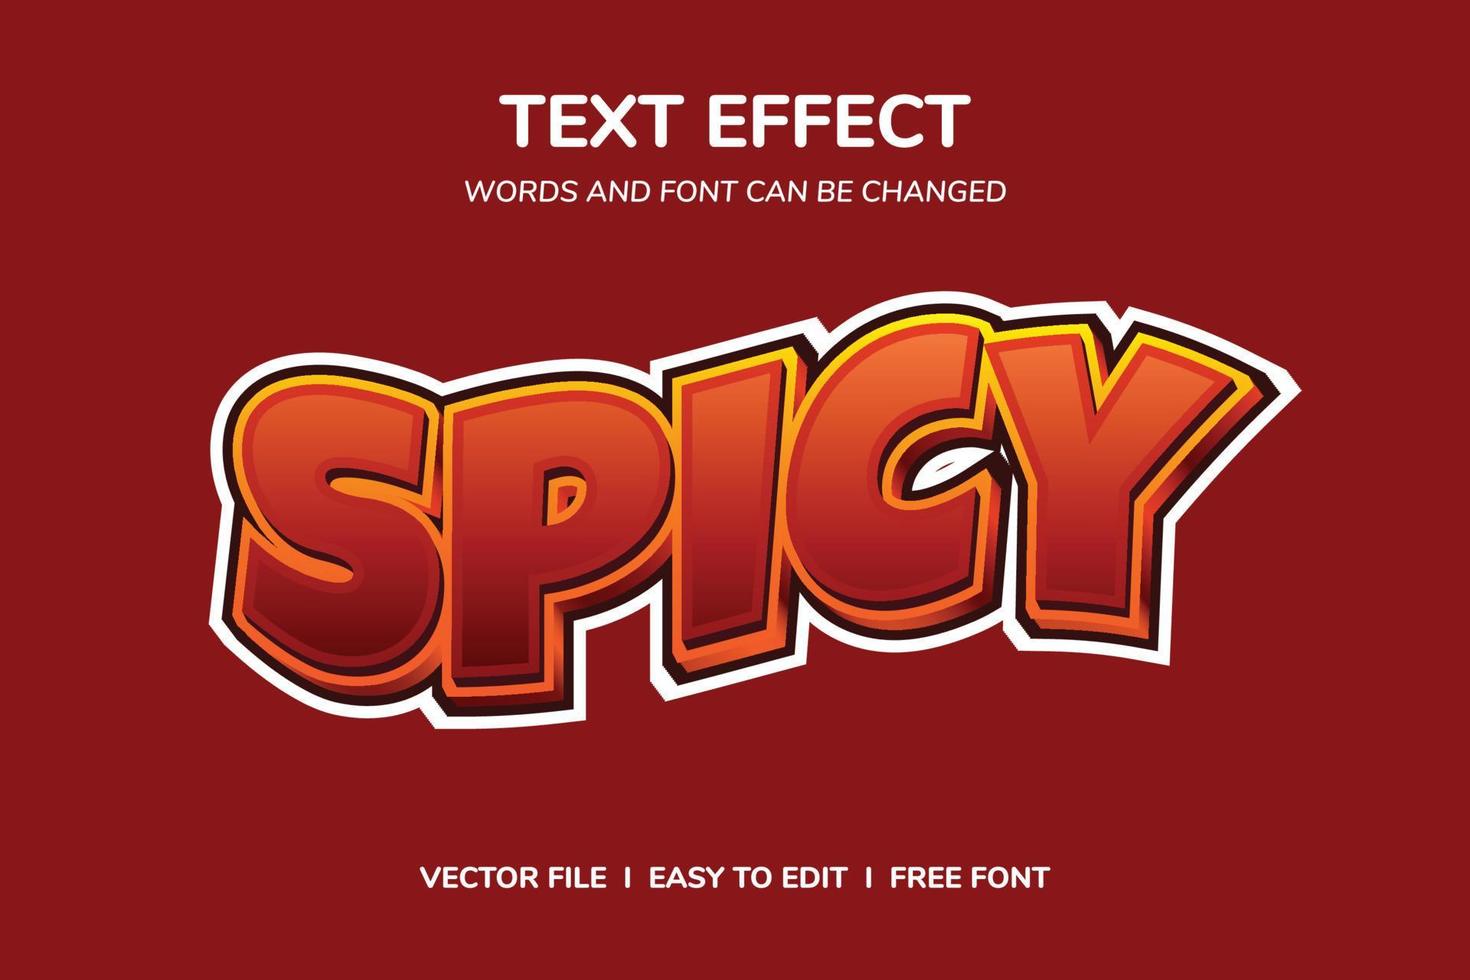 Spicy text effect template with 3d style vector